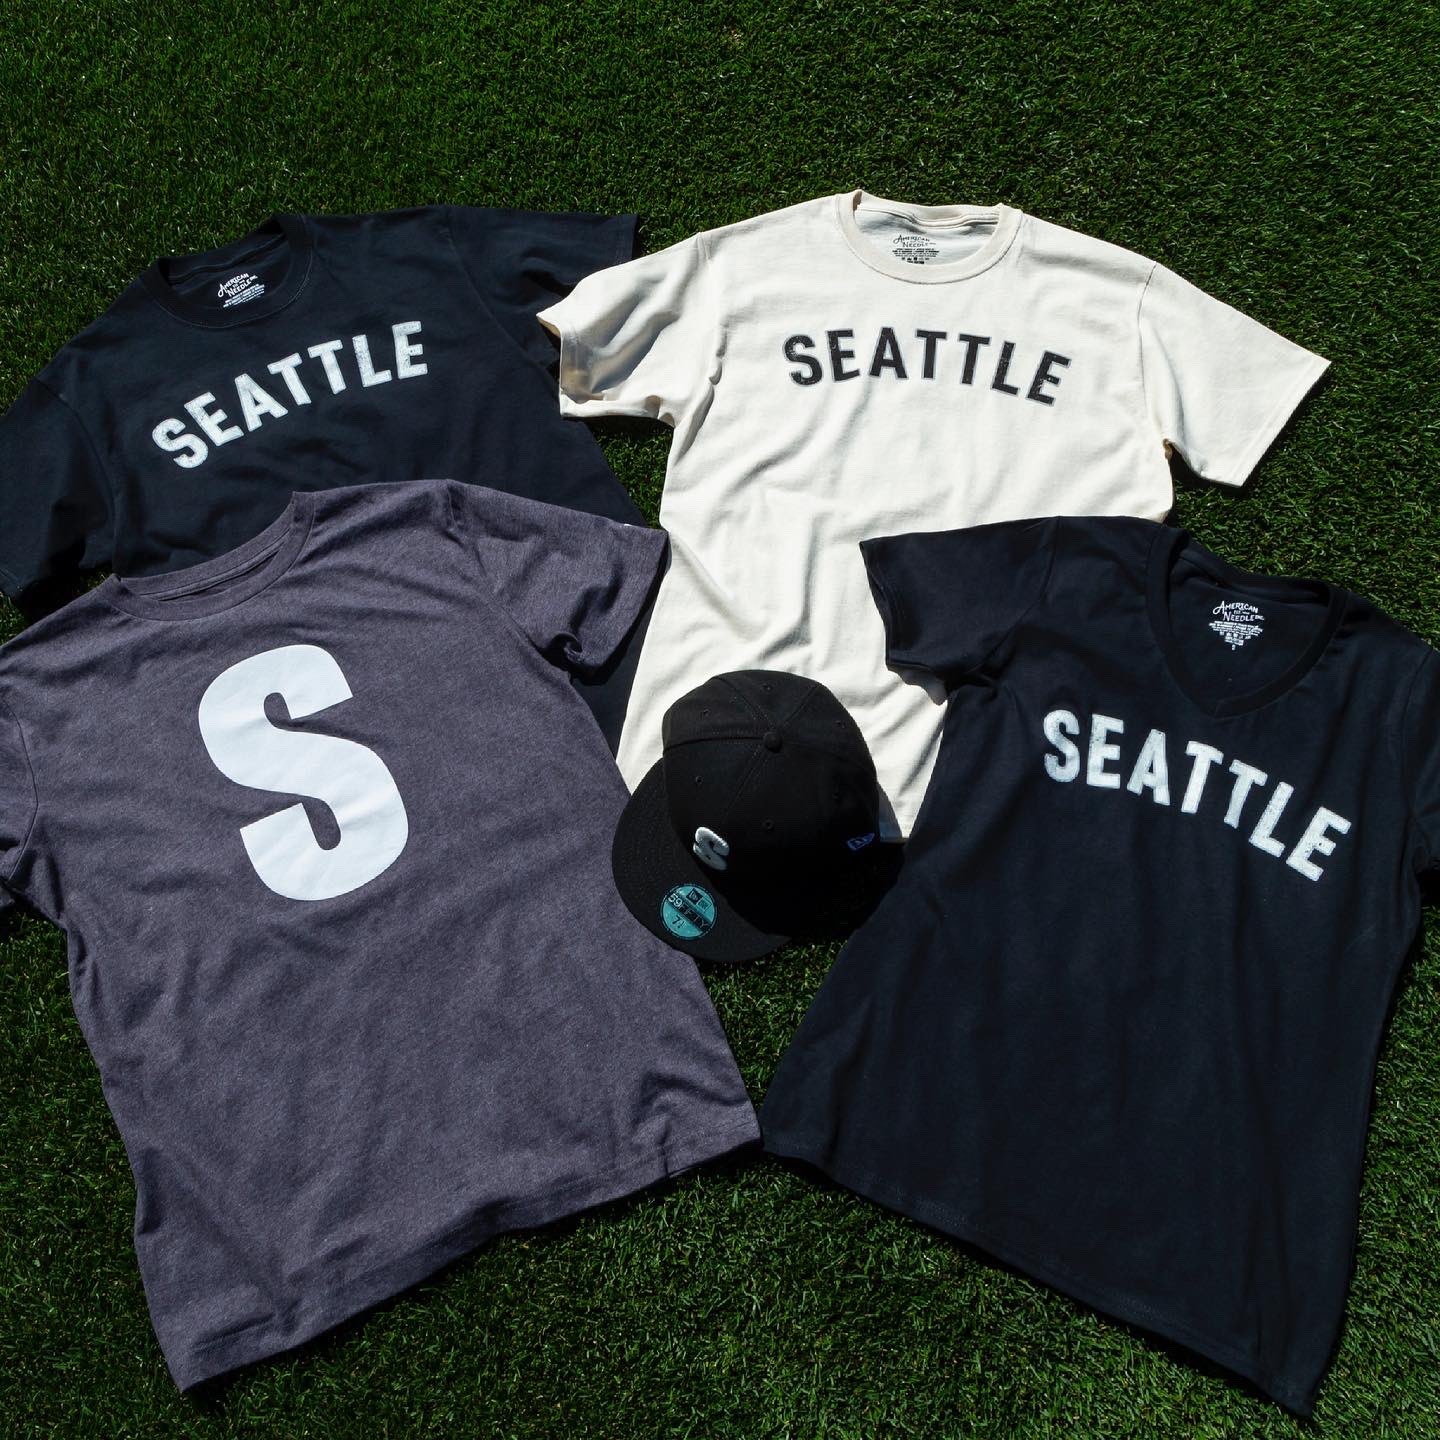 Mariners Team Store on X: Steelheads merchandise is available NOW for mail  order! 🙌 Head to our IG stories or Steelheads highlight for item numbers  and pricing. Ready to order? Email us